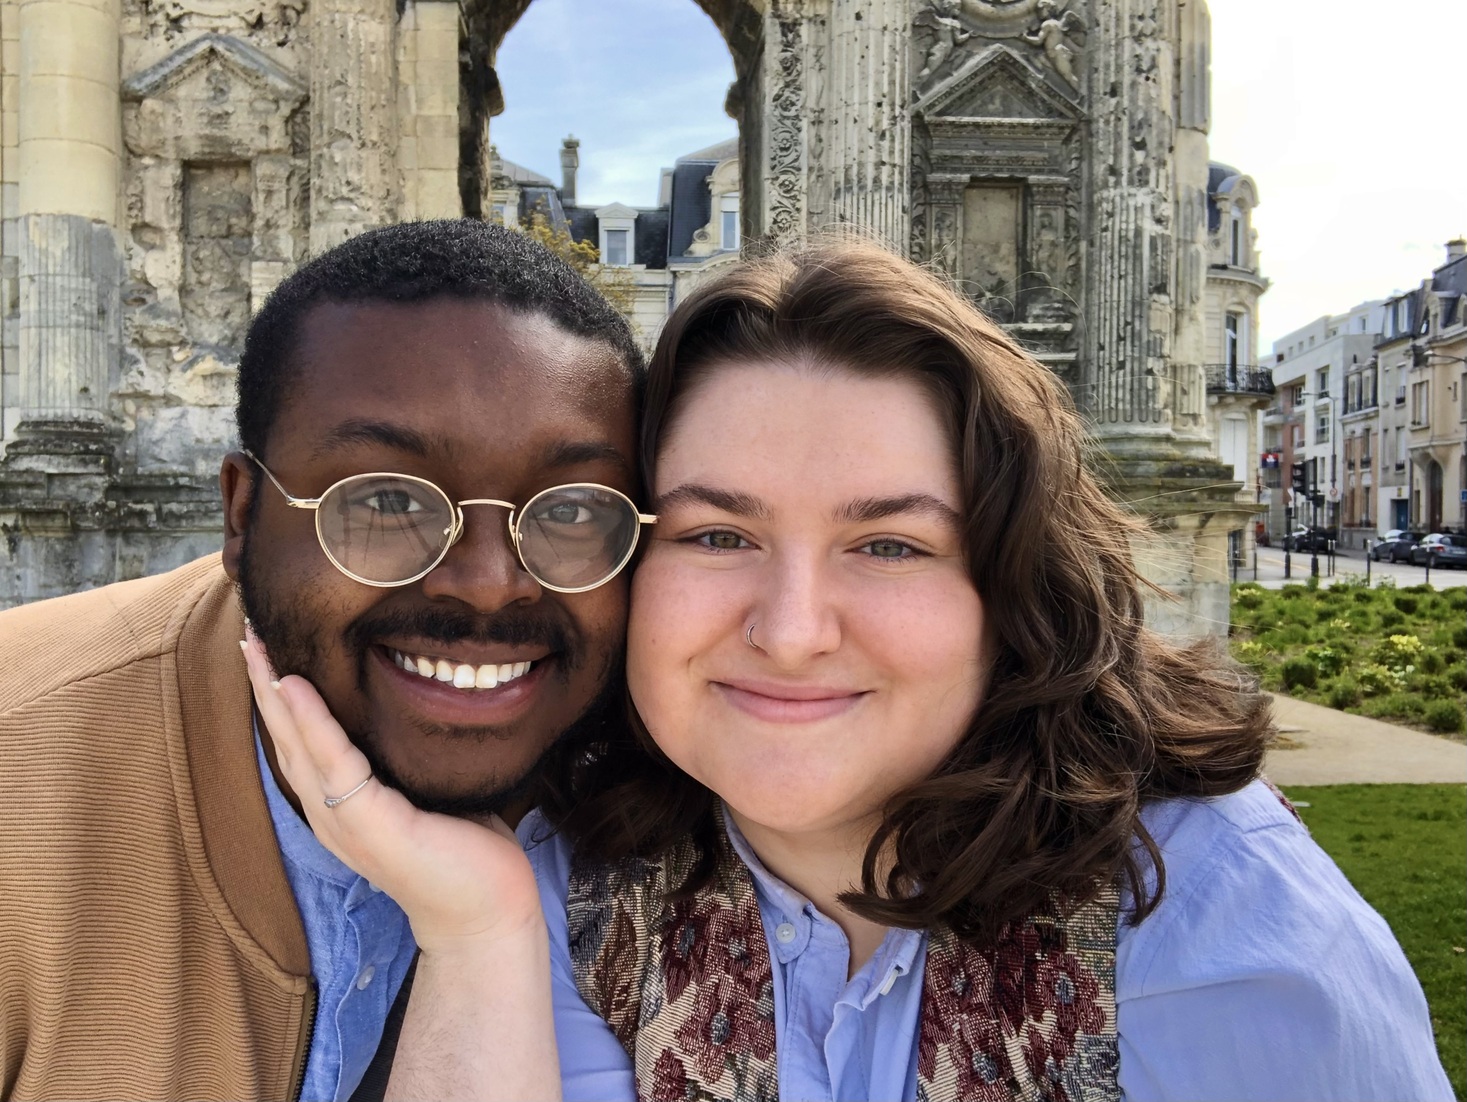 Jalen and Maria smile in front of the Porte de Mars in Reims, France.